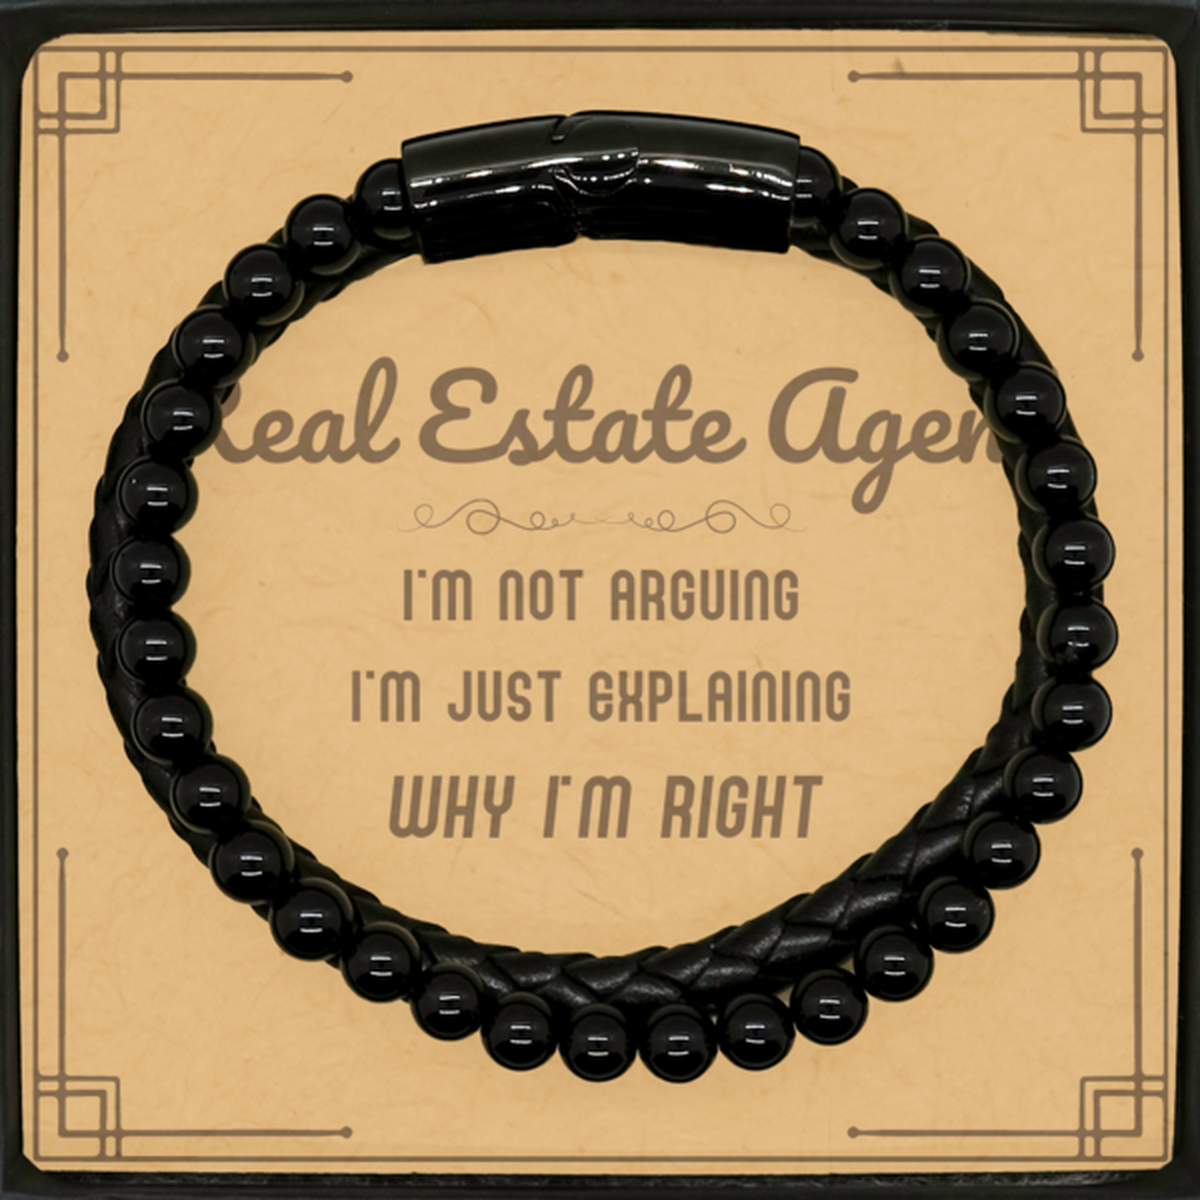 Real Estate Agent I'm not Arguing. I'm Just Explaining Why I'm RIGHT Stone Leather Bracelets, Funny Saying Quote Real Estate Agent Gifts For Real Estate Agent Message Card Graduation Birthday Christmas Gifts for Men Women Coworker